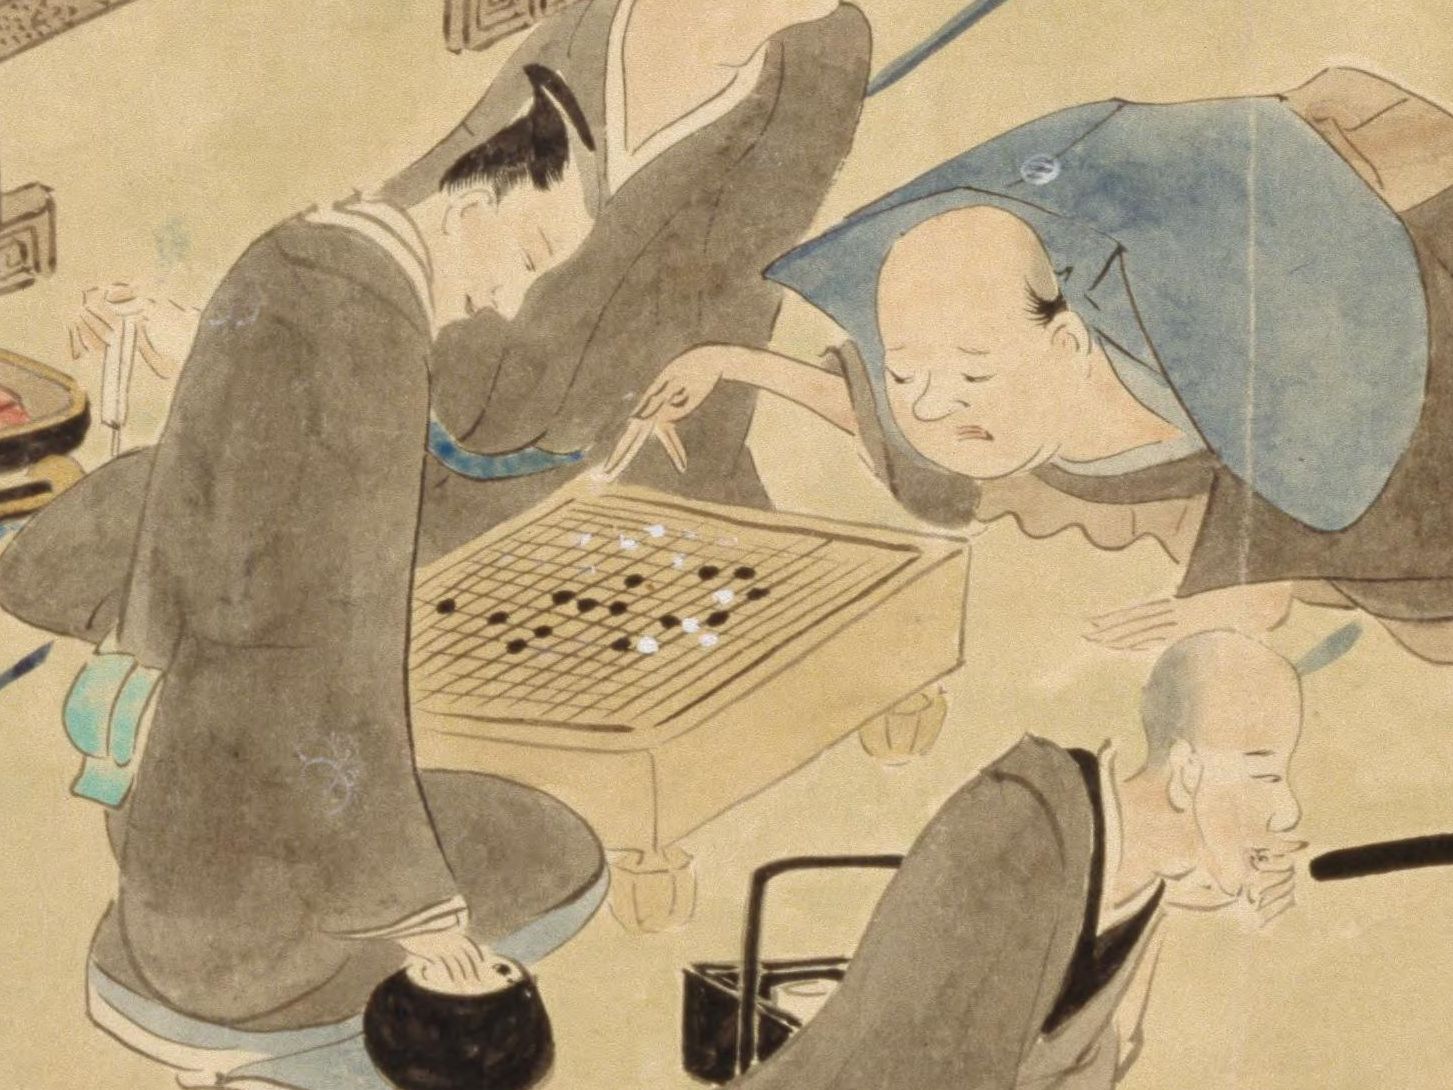 Japanese Go - a board game of white and black stones